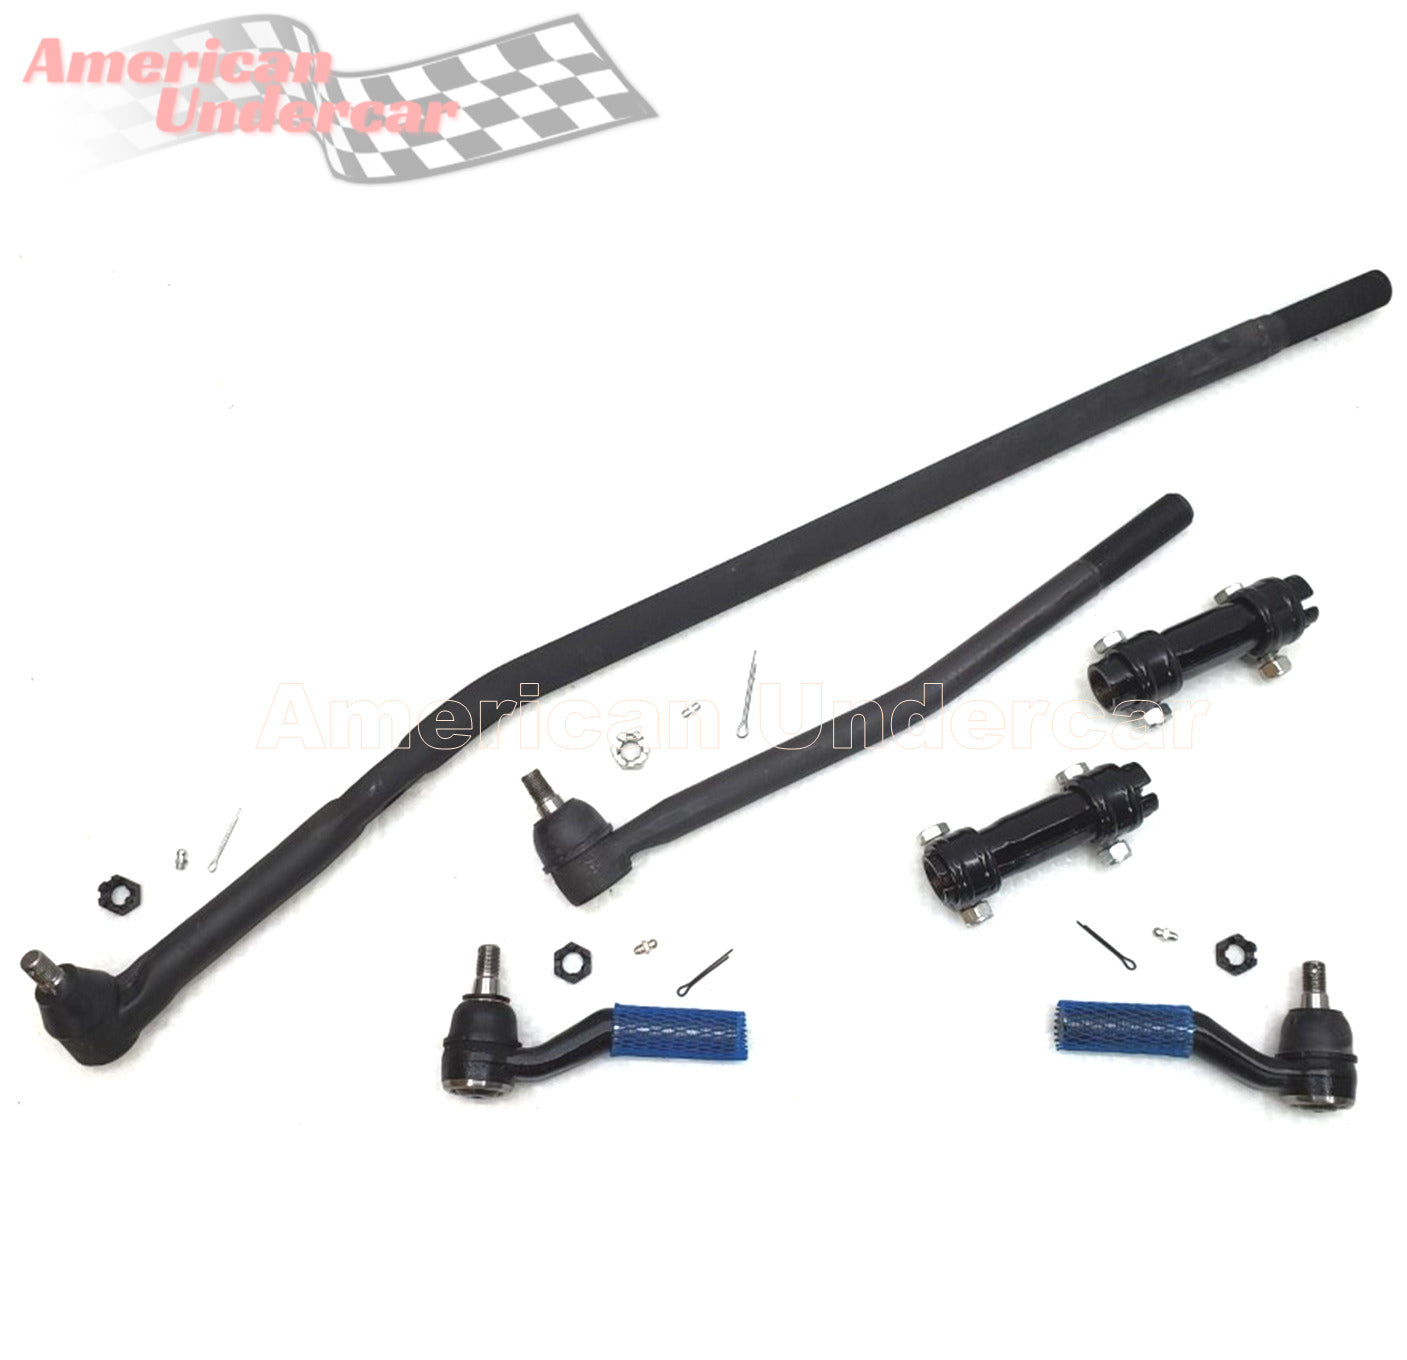 Lifetime Drag Link Tie Rod Sleeve Steering Kit for 2007-2014 Ford E250 2WD